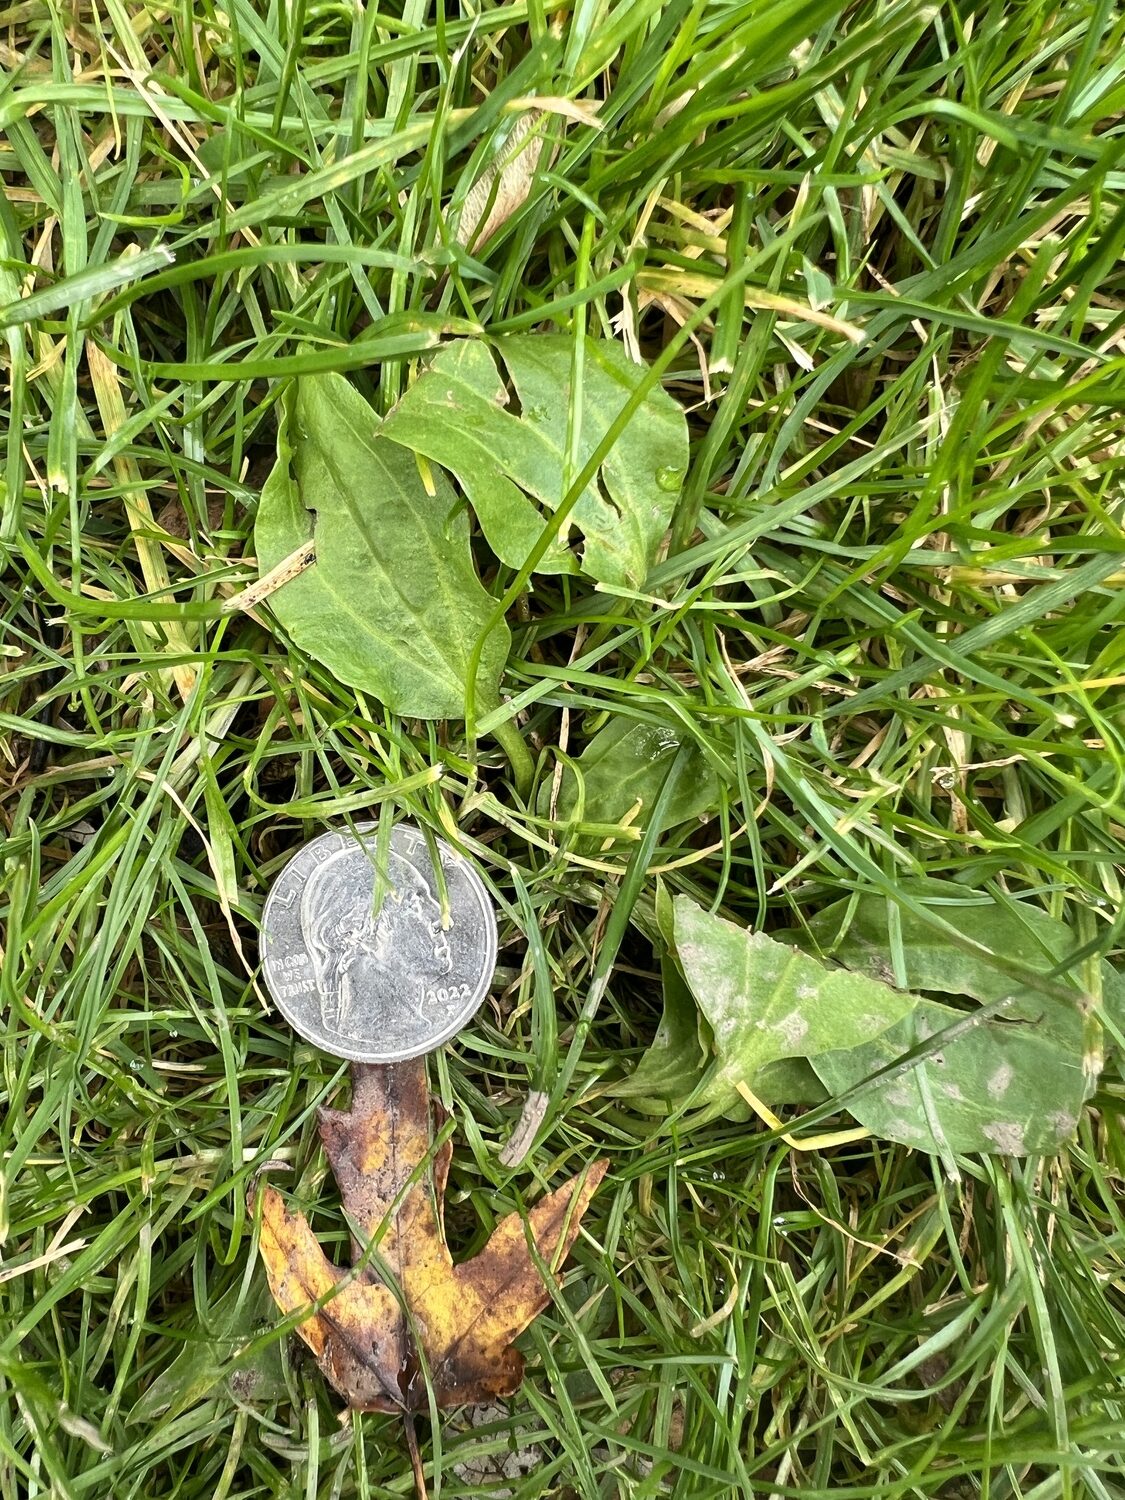 One of the two common plantains found in most lawns. This is this year's seedling, which will have a small root and is easy to remove with a weeding tool. If left in the lawn it will flower next spring and drop hundreds of seeds.